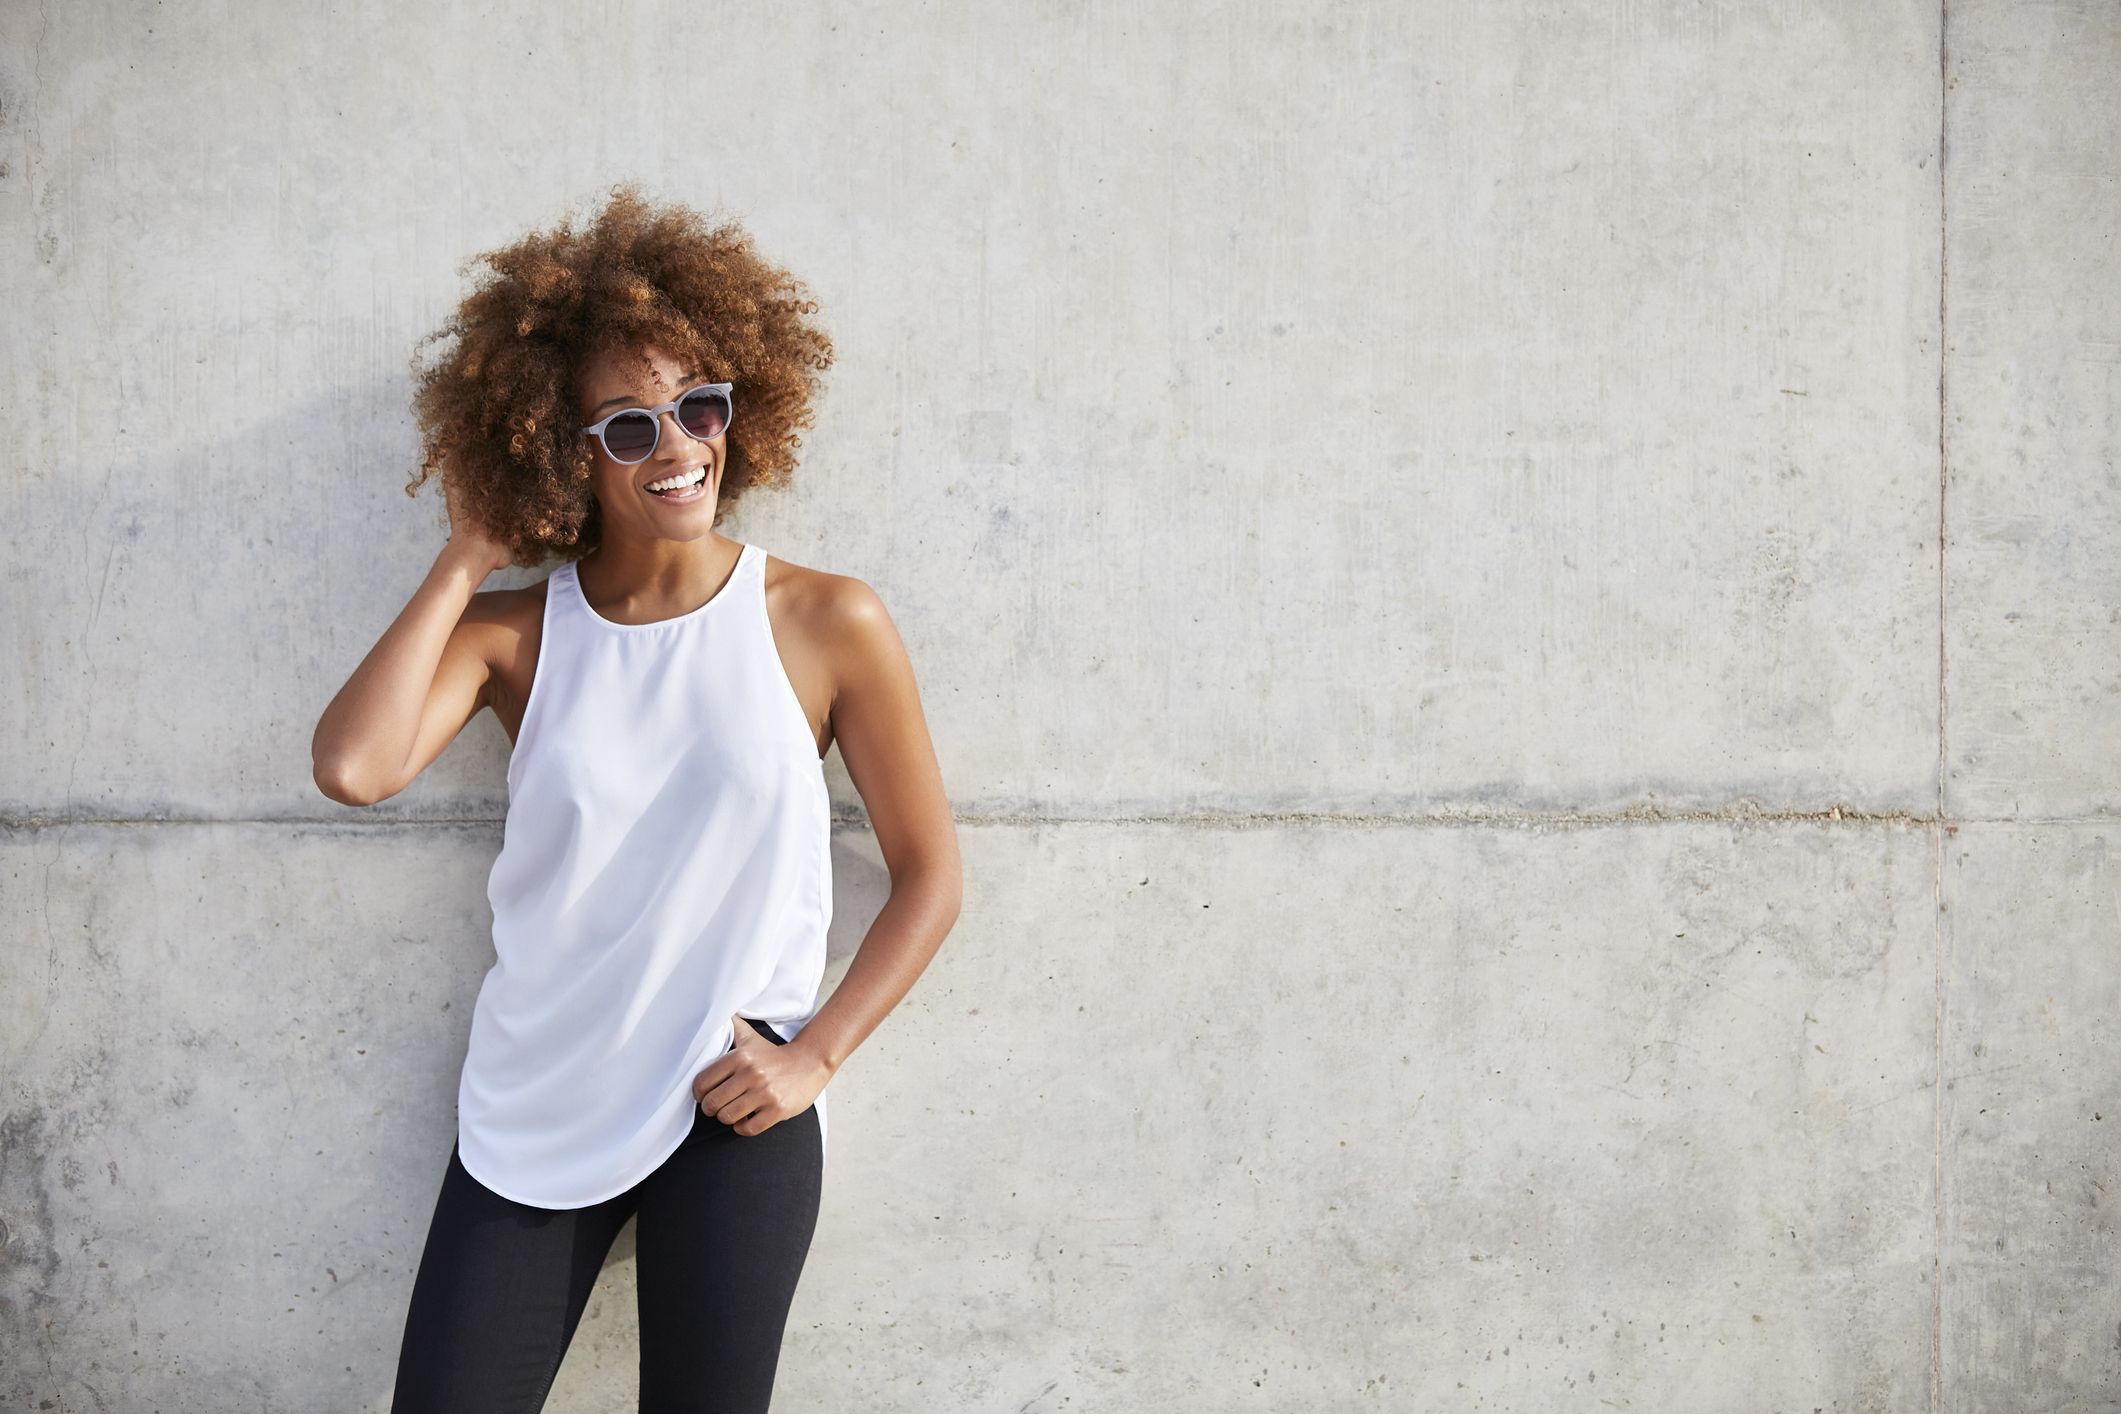 The Perfect Tank Tops for Strong Women, Girls and Members of the